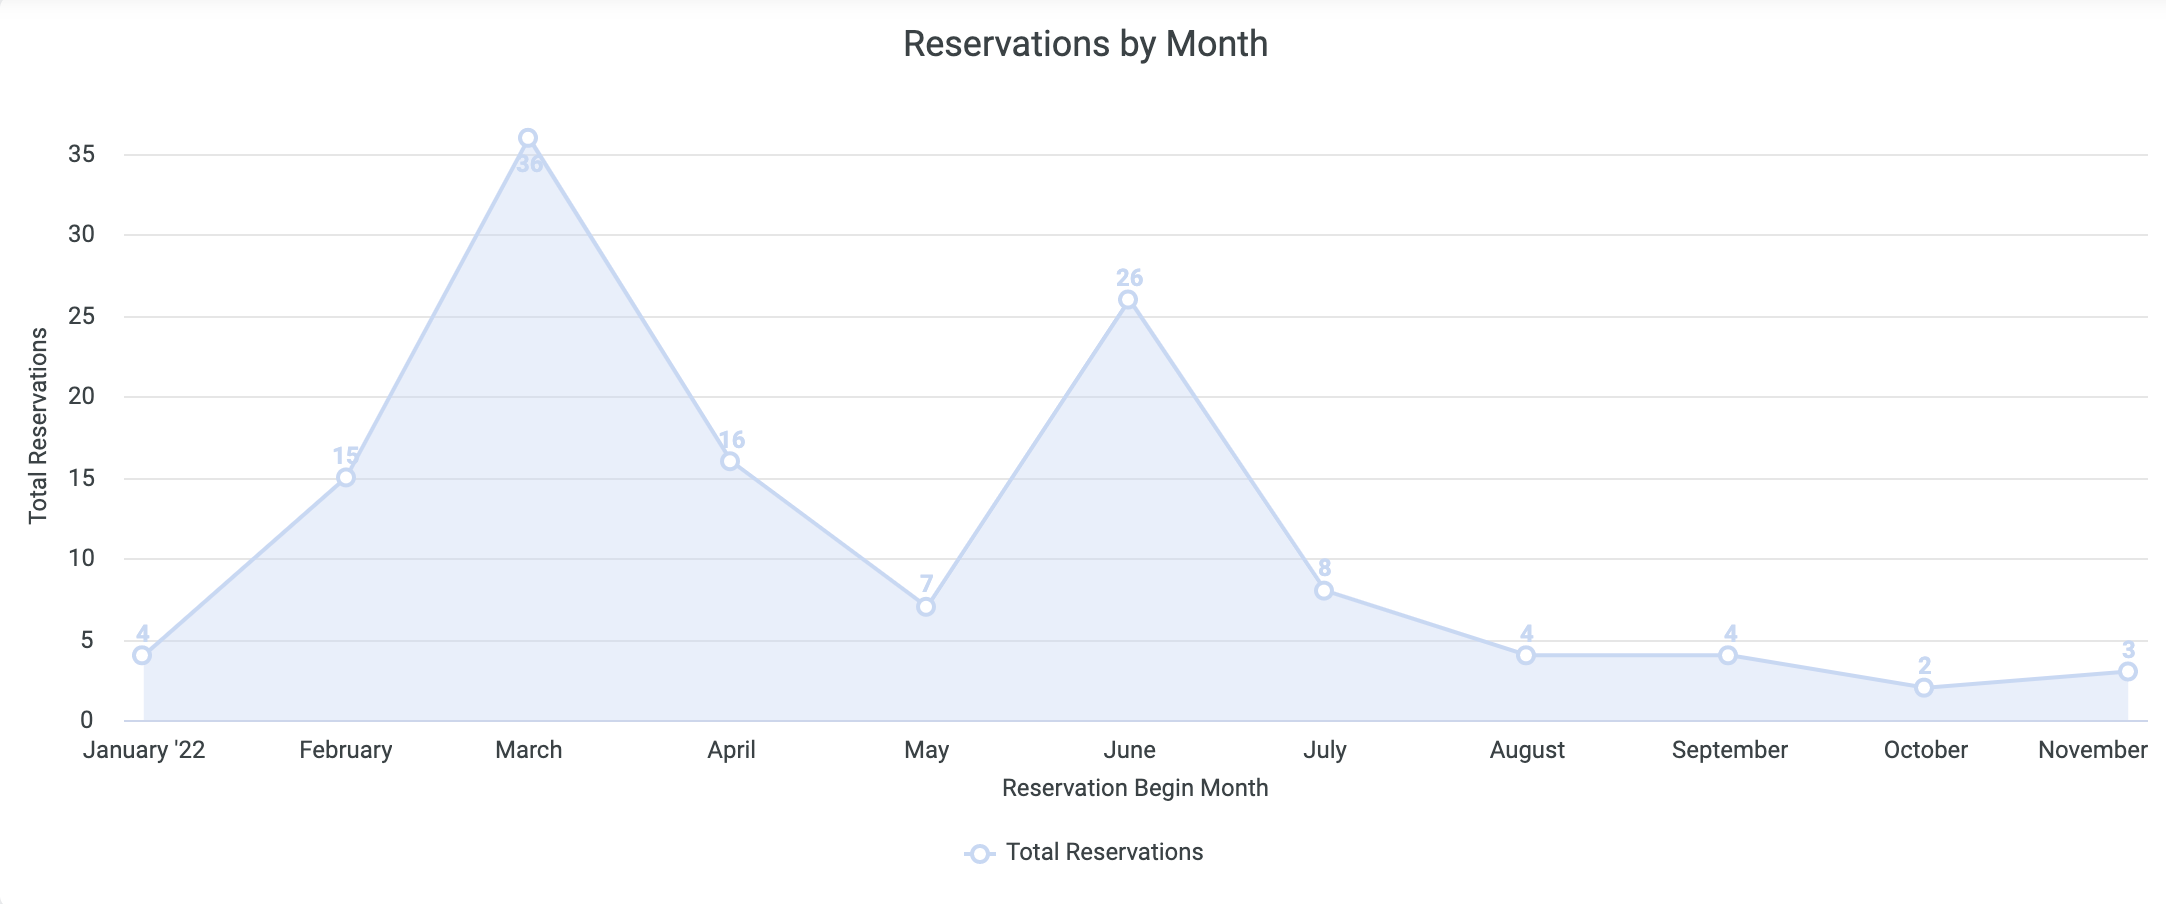 Reservations_by_month.png